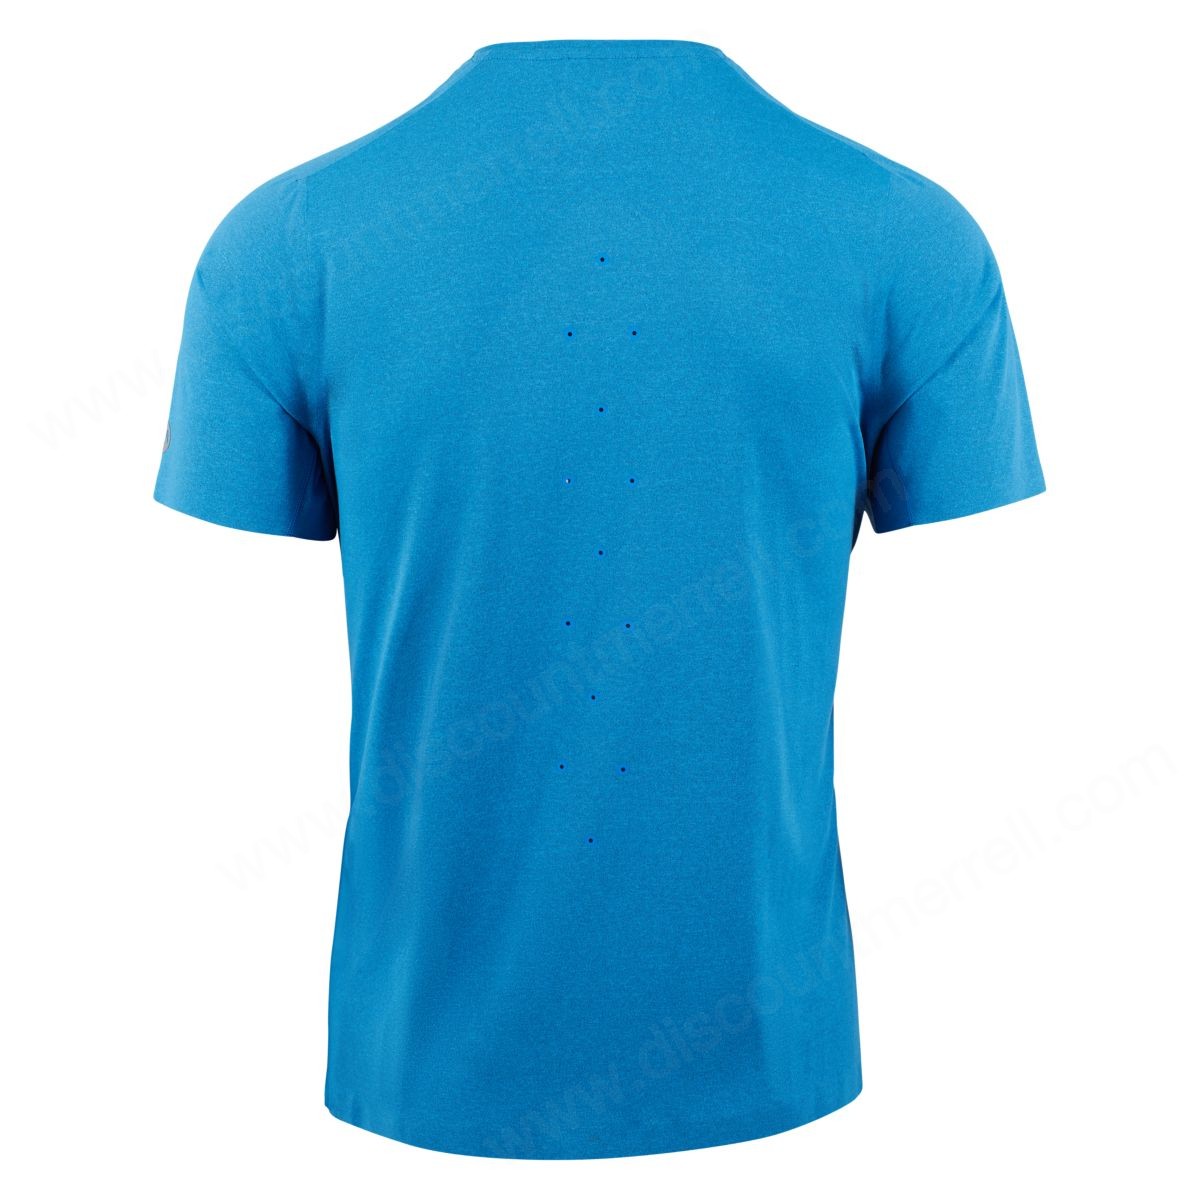 Merrell Man's Short Sleeve Tech Tshirts With Polartec® Power Stretch® Pro™ Fabric French Blue - -1